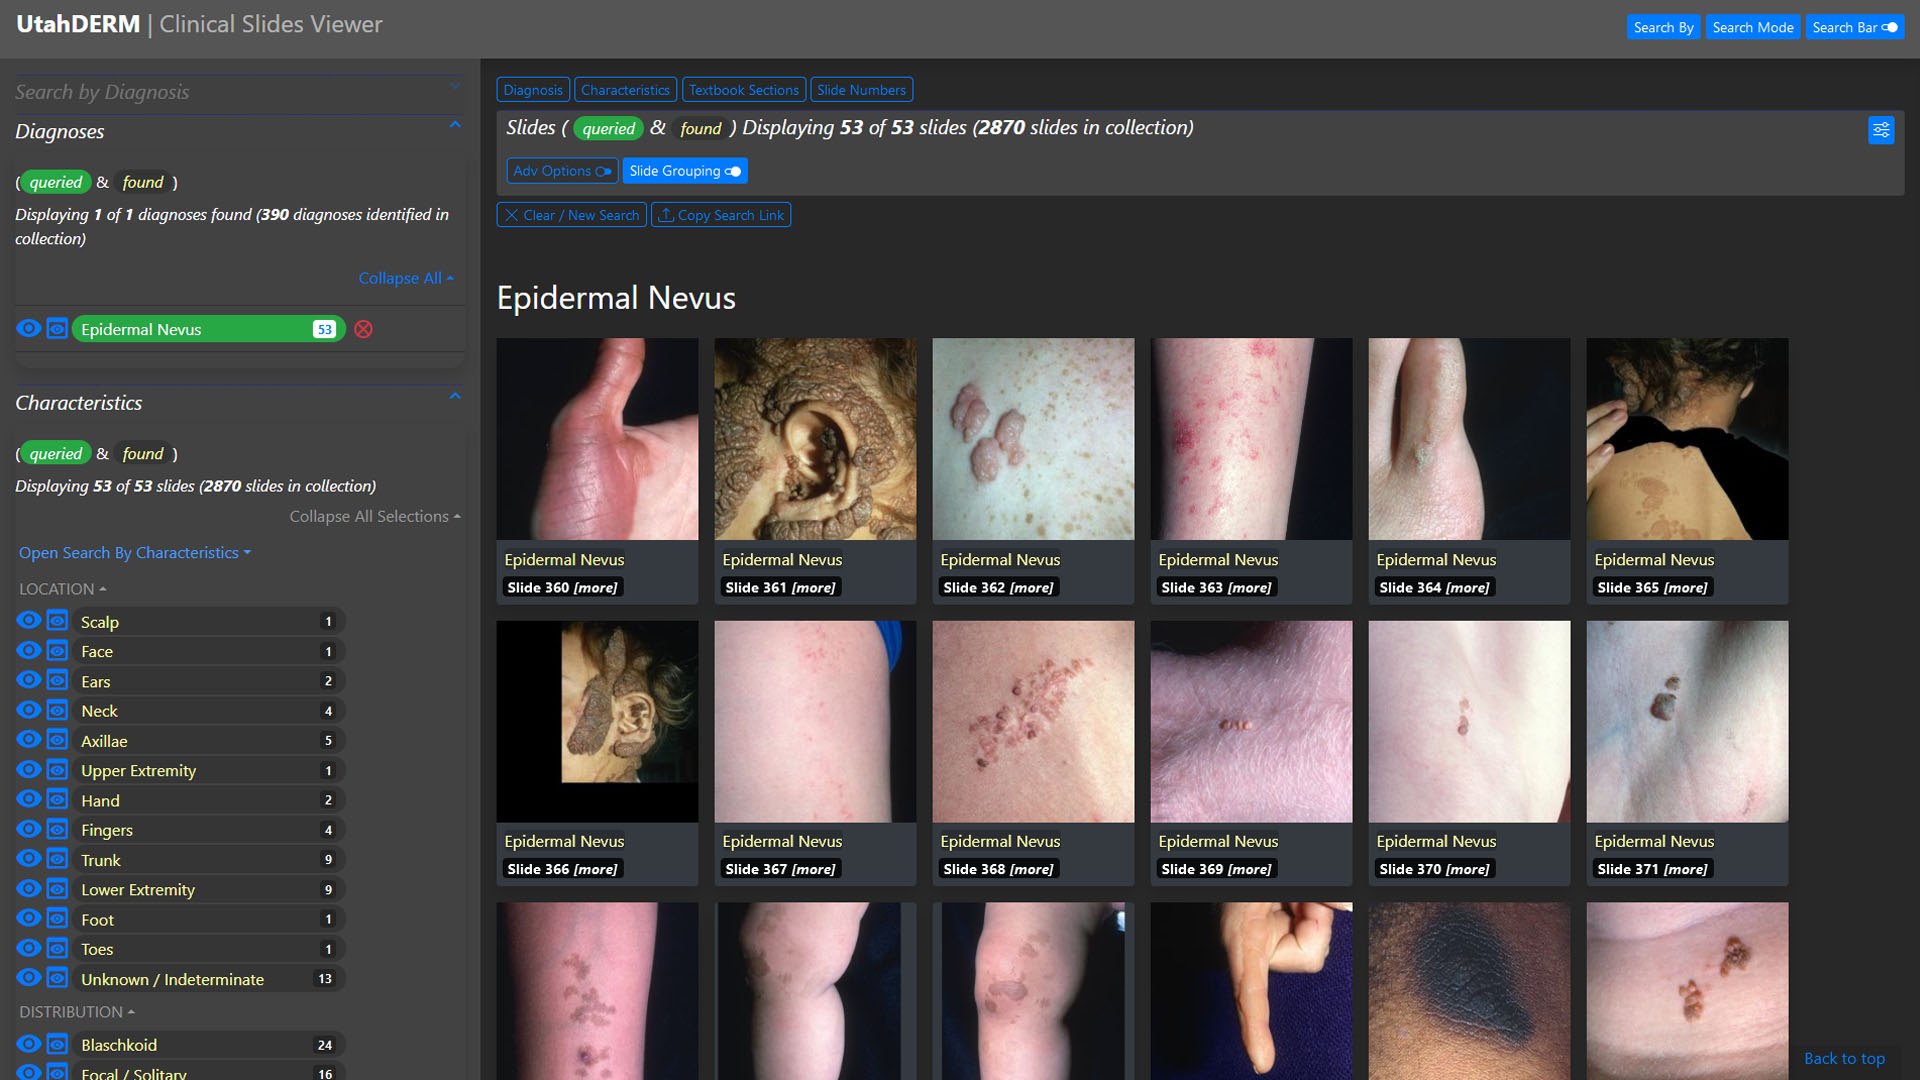 Screenshot of the Utah Dermatology Education Resources and Modules project